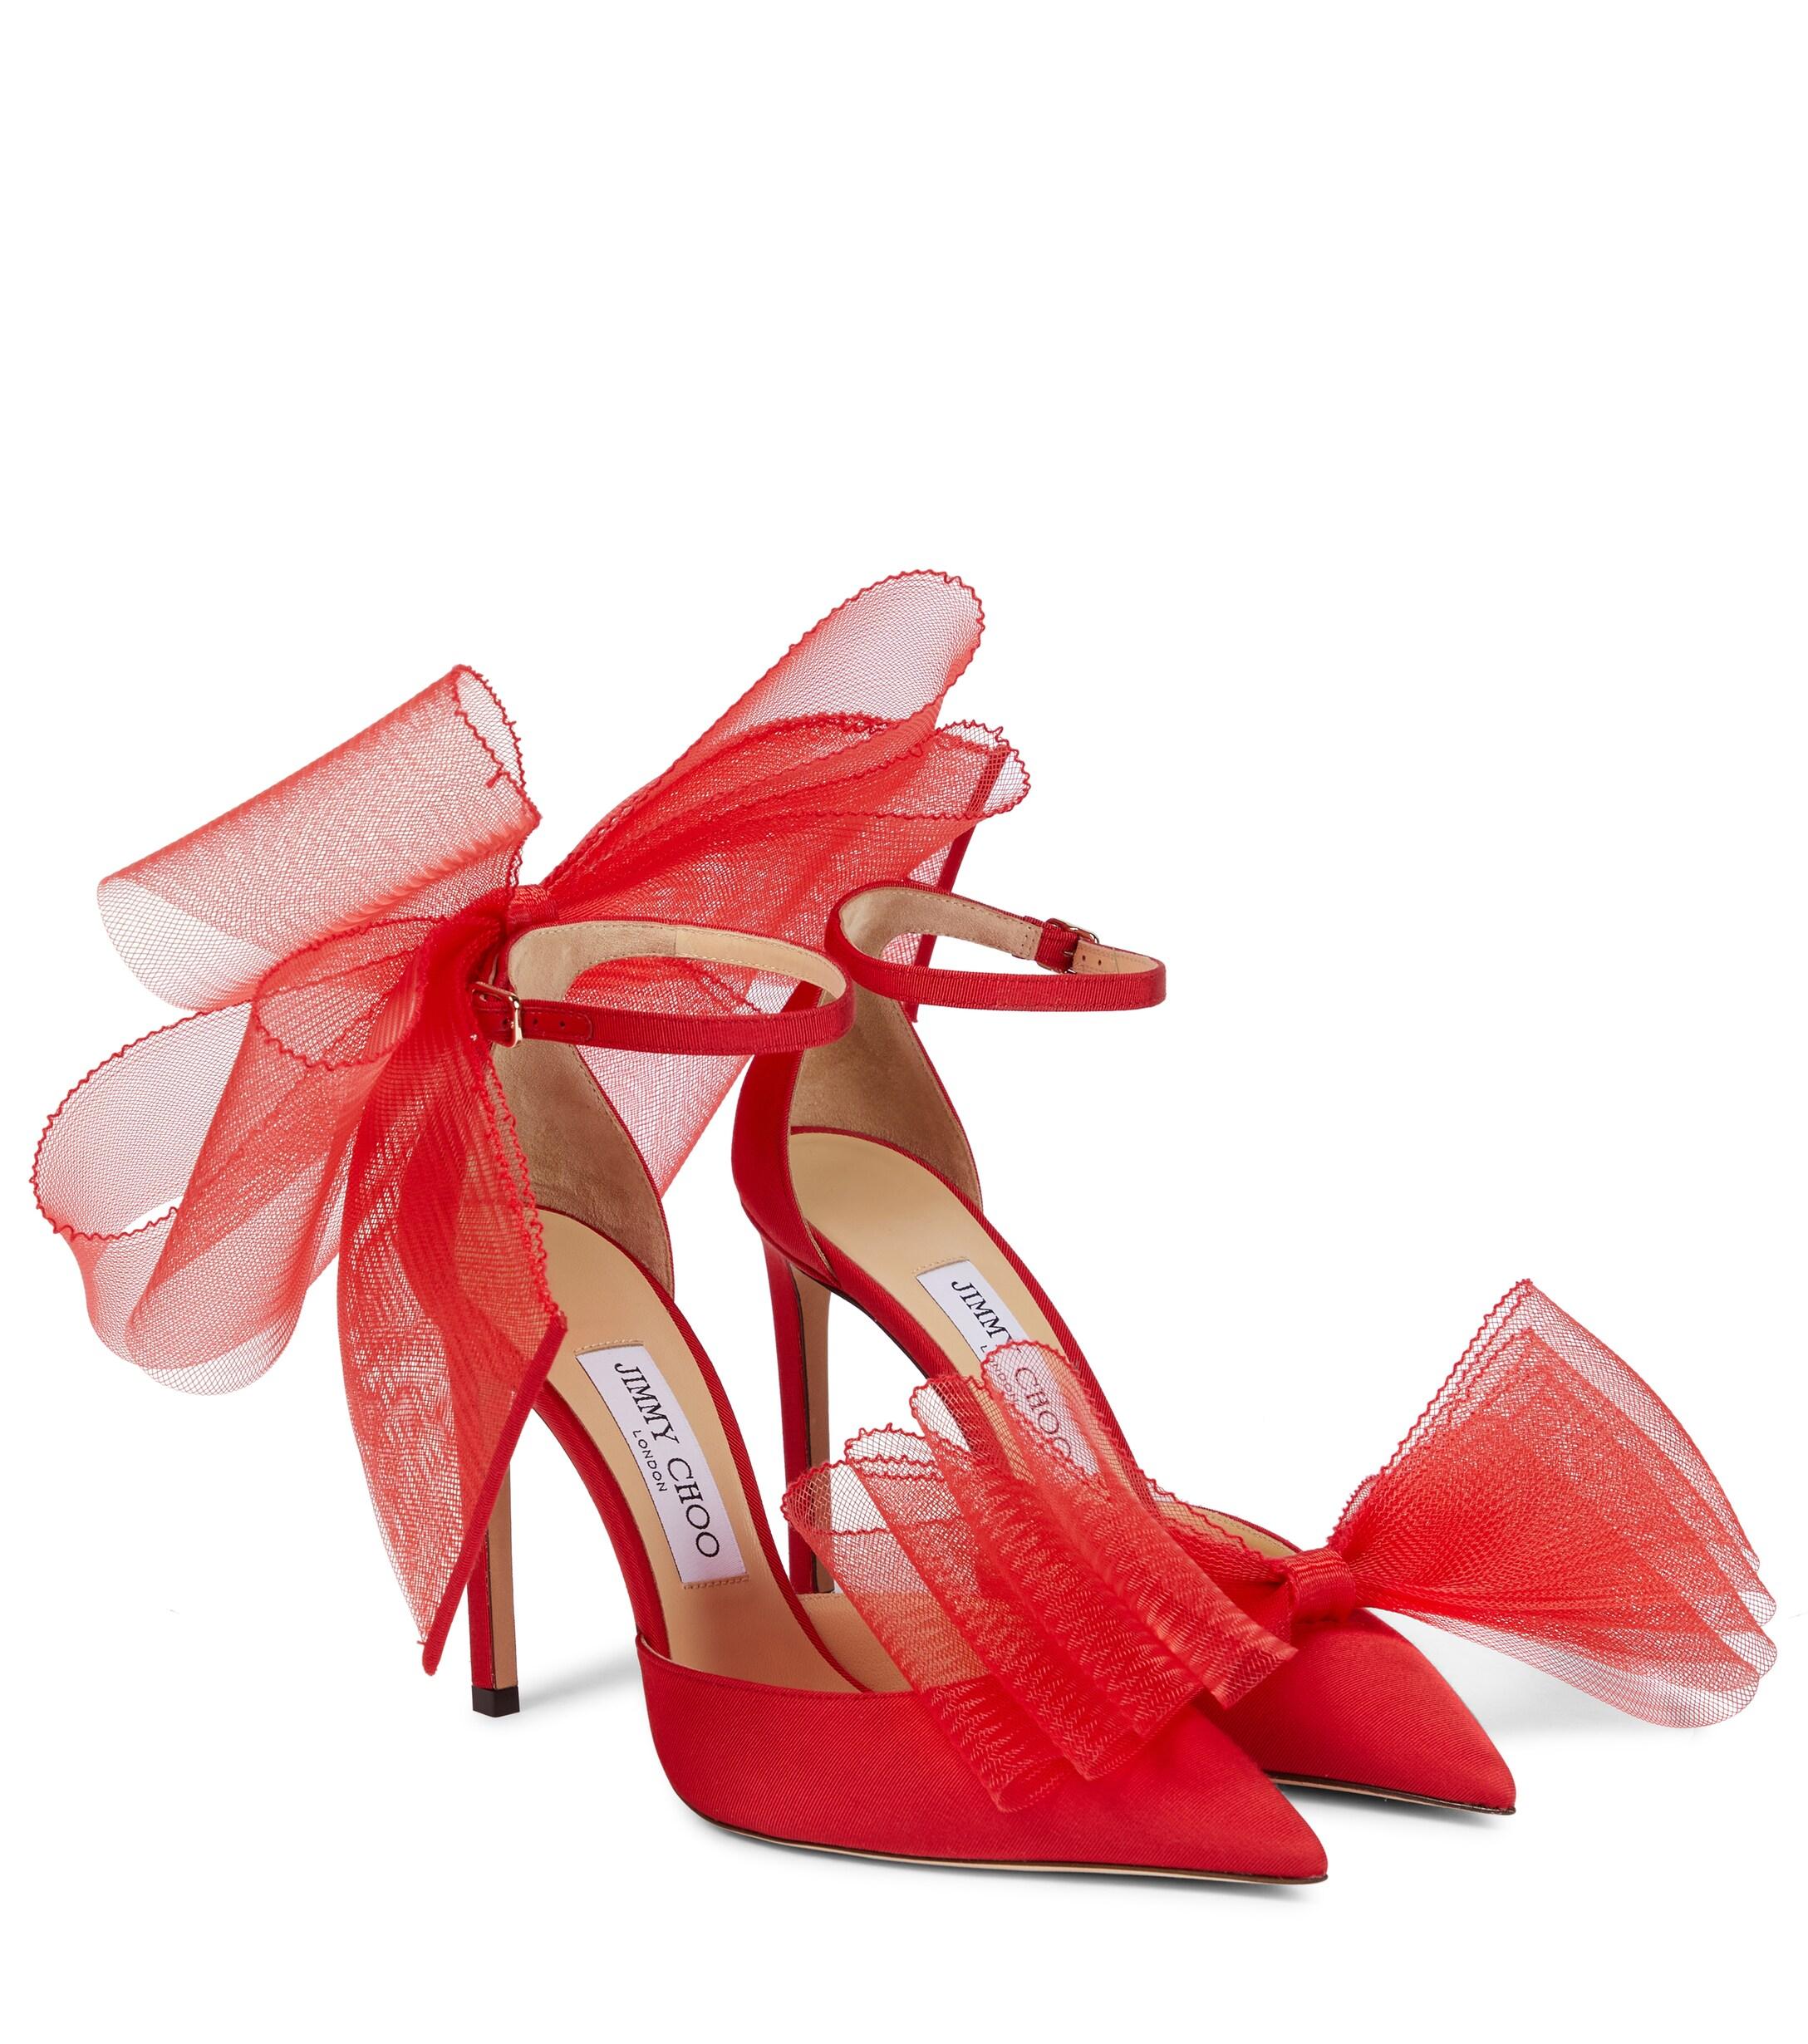 Averly 100 Bow-trimmed Pumps